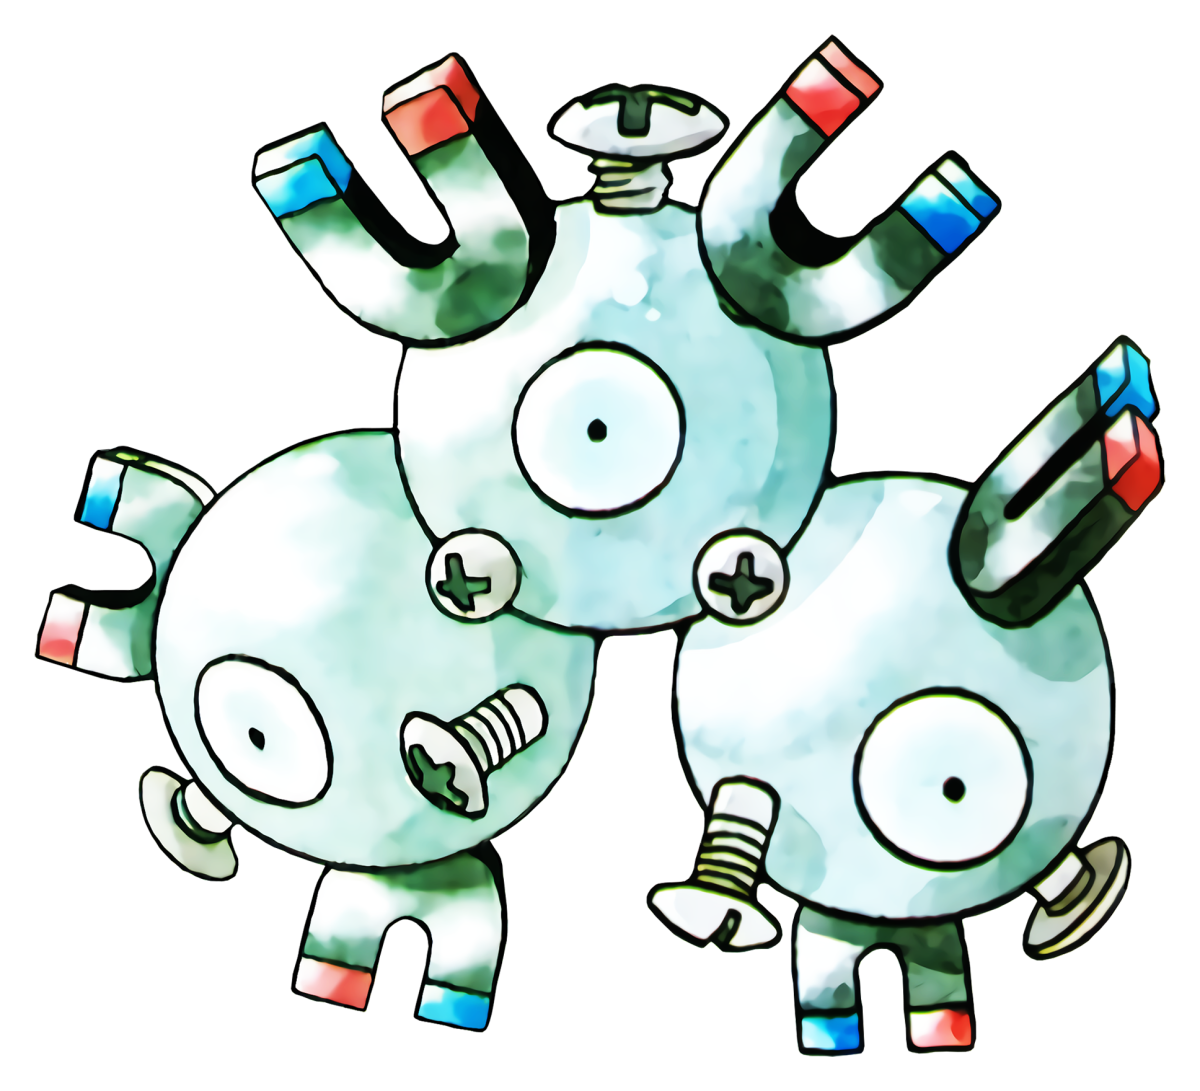 Ken Sugimori's official artwork for three ball bearings with some standard magnets.